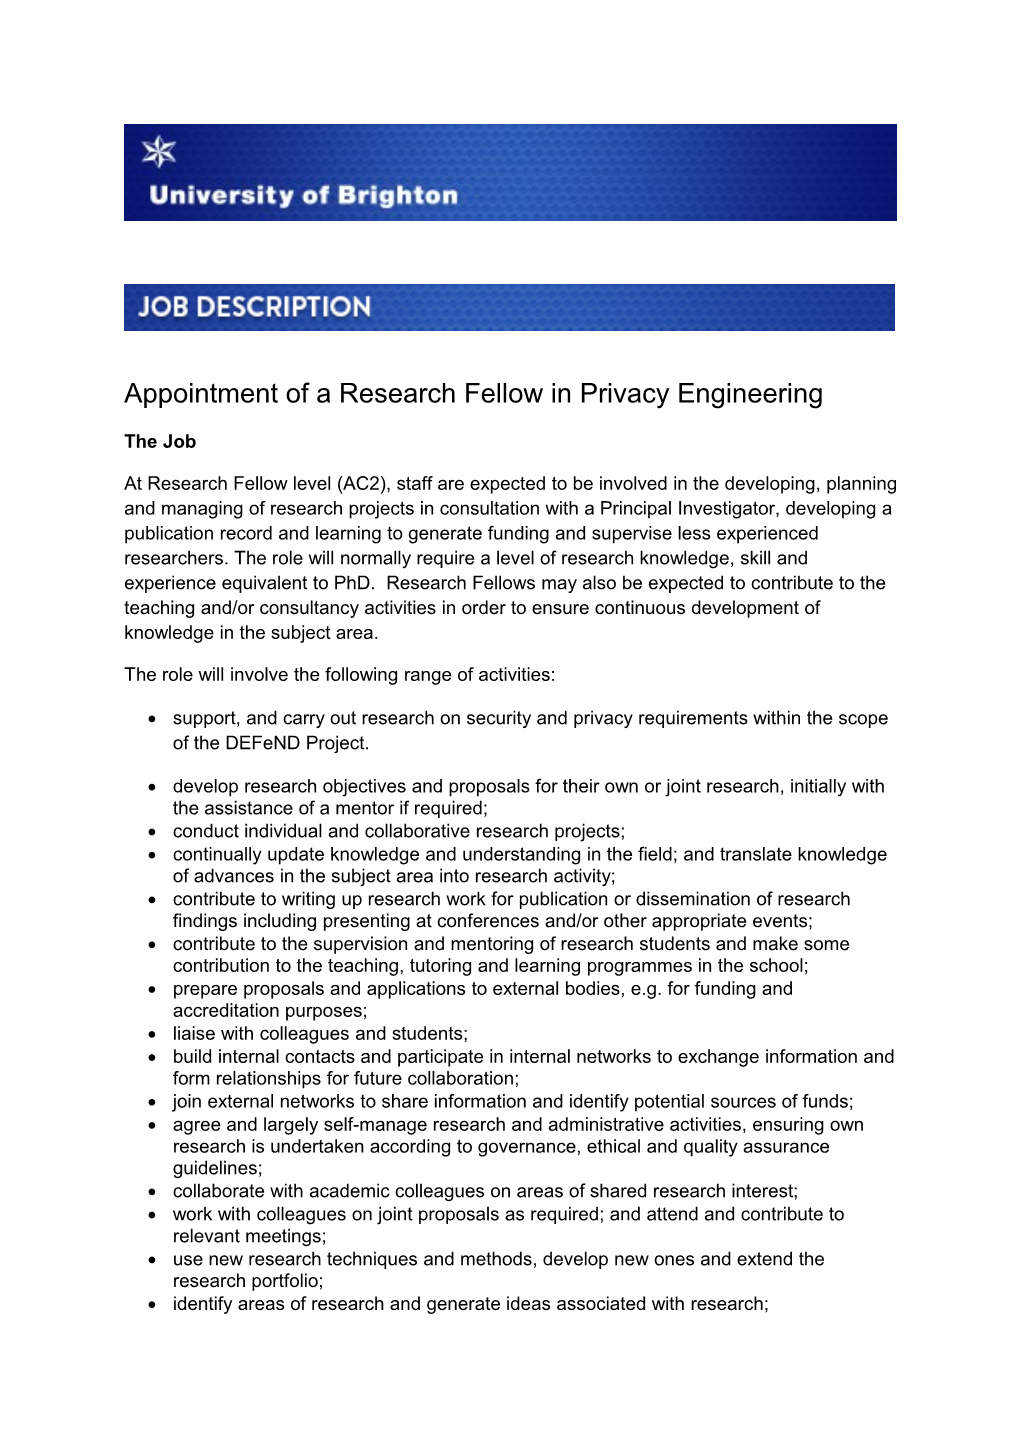 Appointment of a Research Fellow in Privacy Engineering